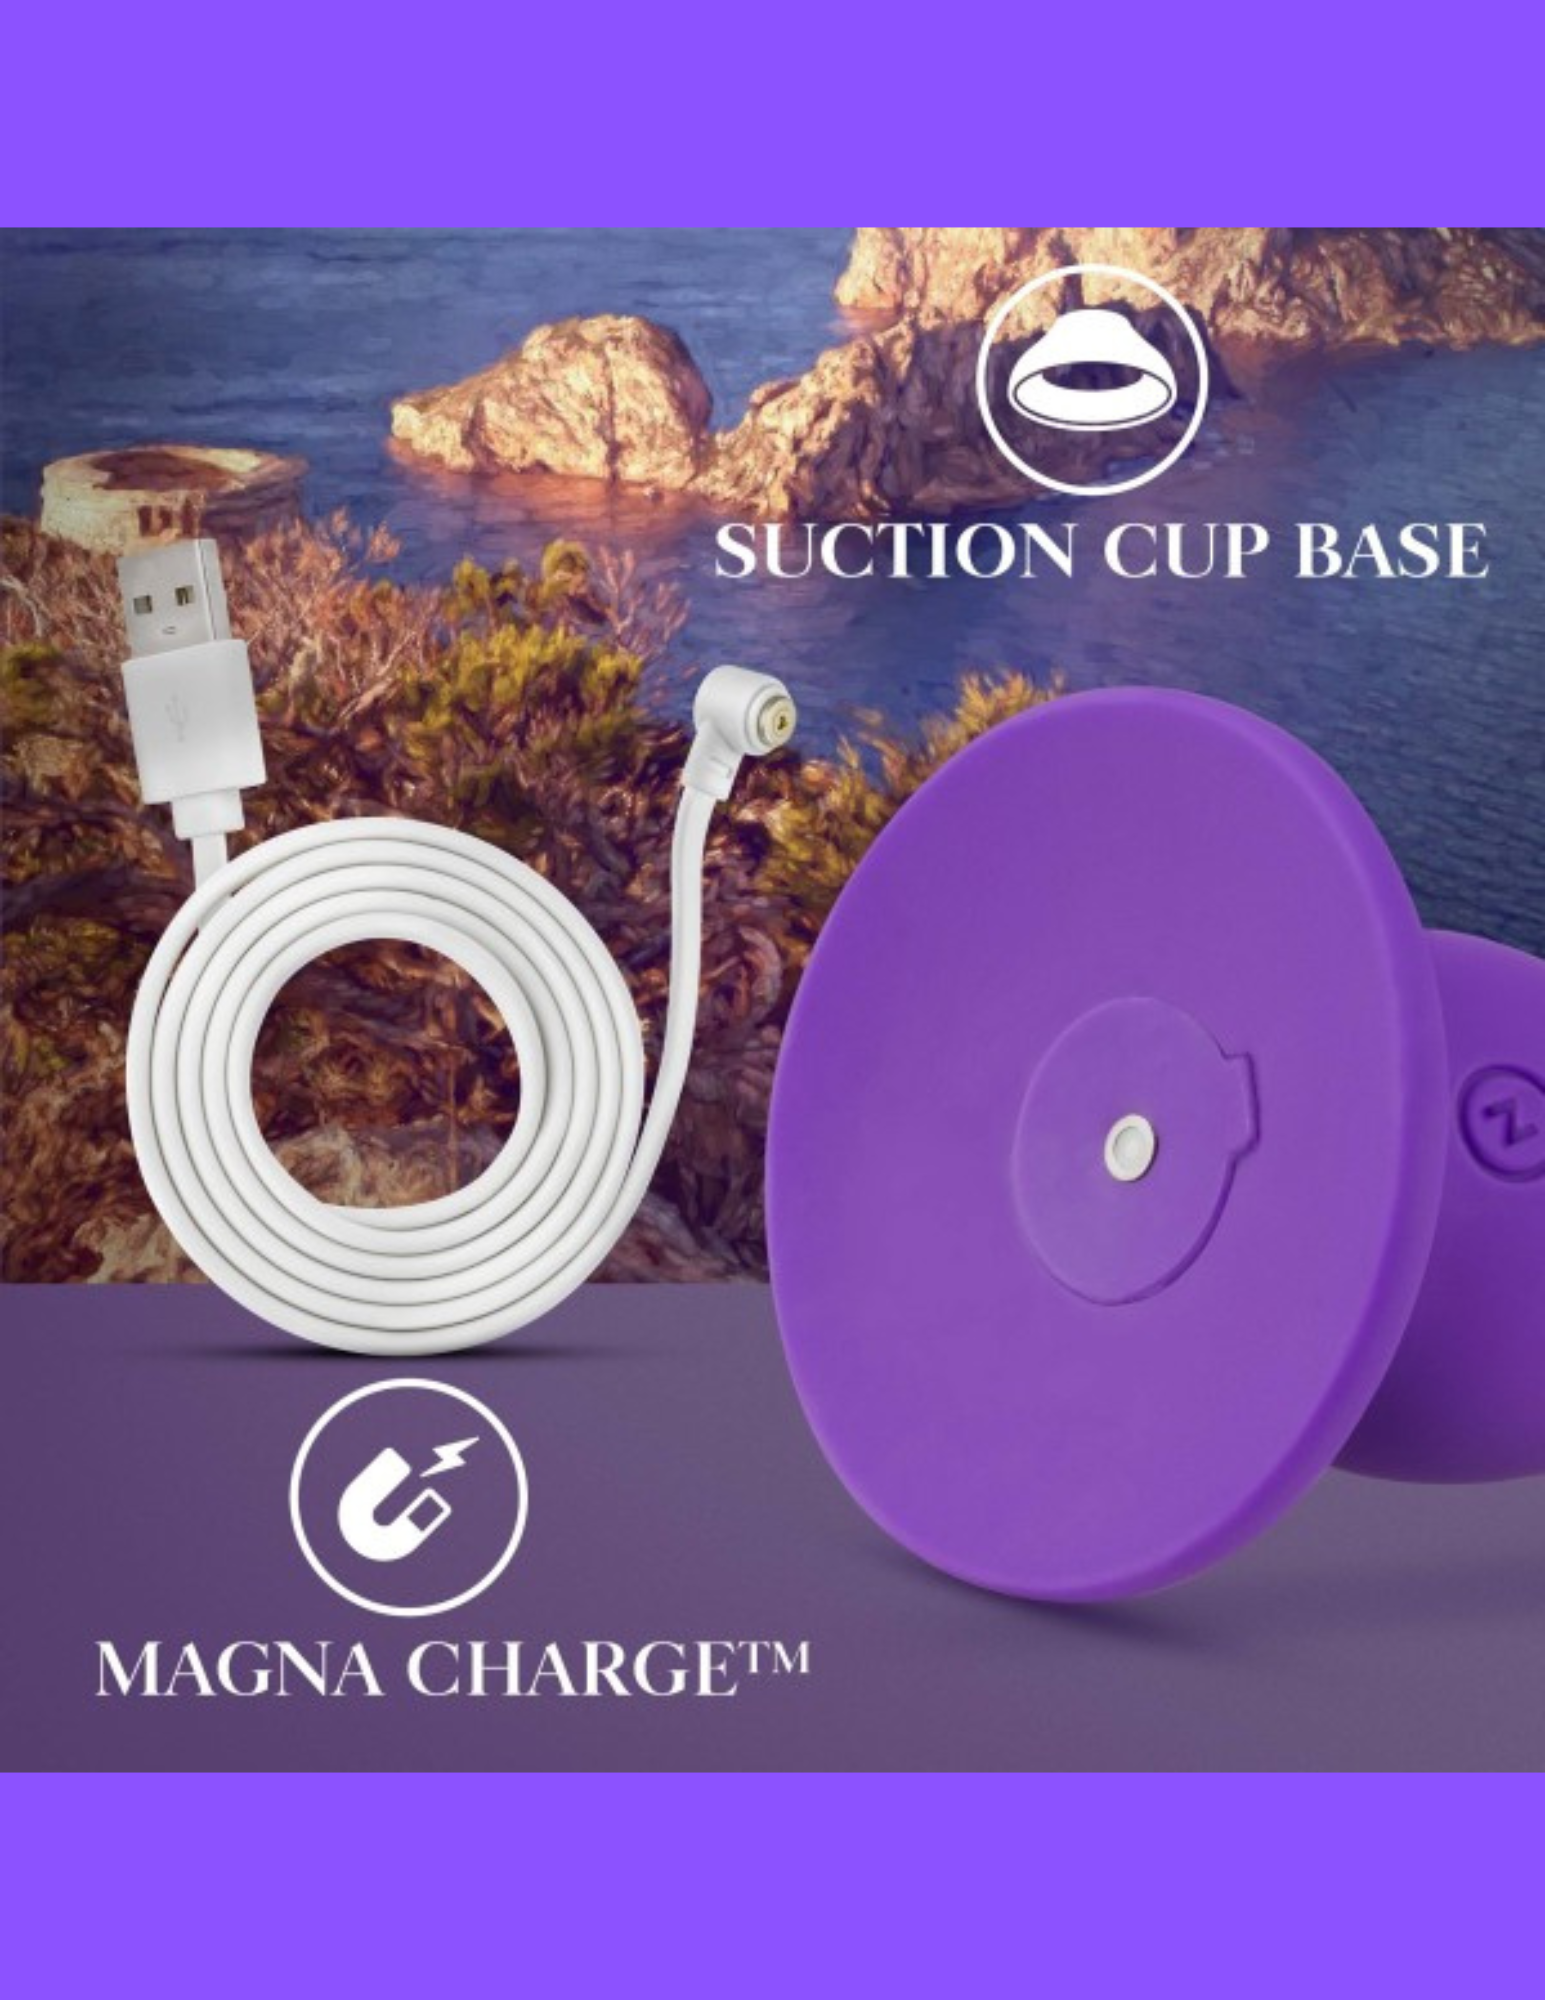 Image features the magnetic USB charging cord and port on the Impressions Ibiza Vibrator from Blush (purple).